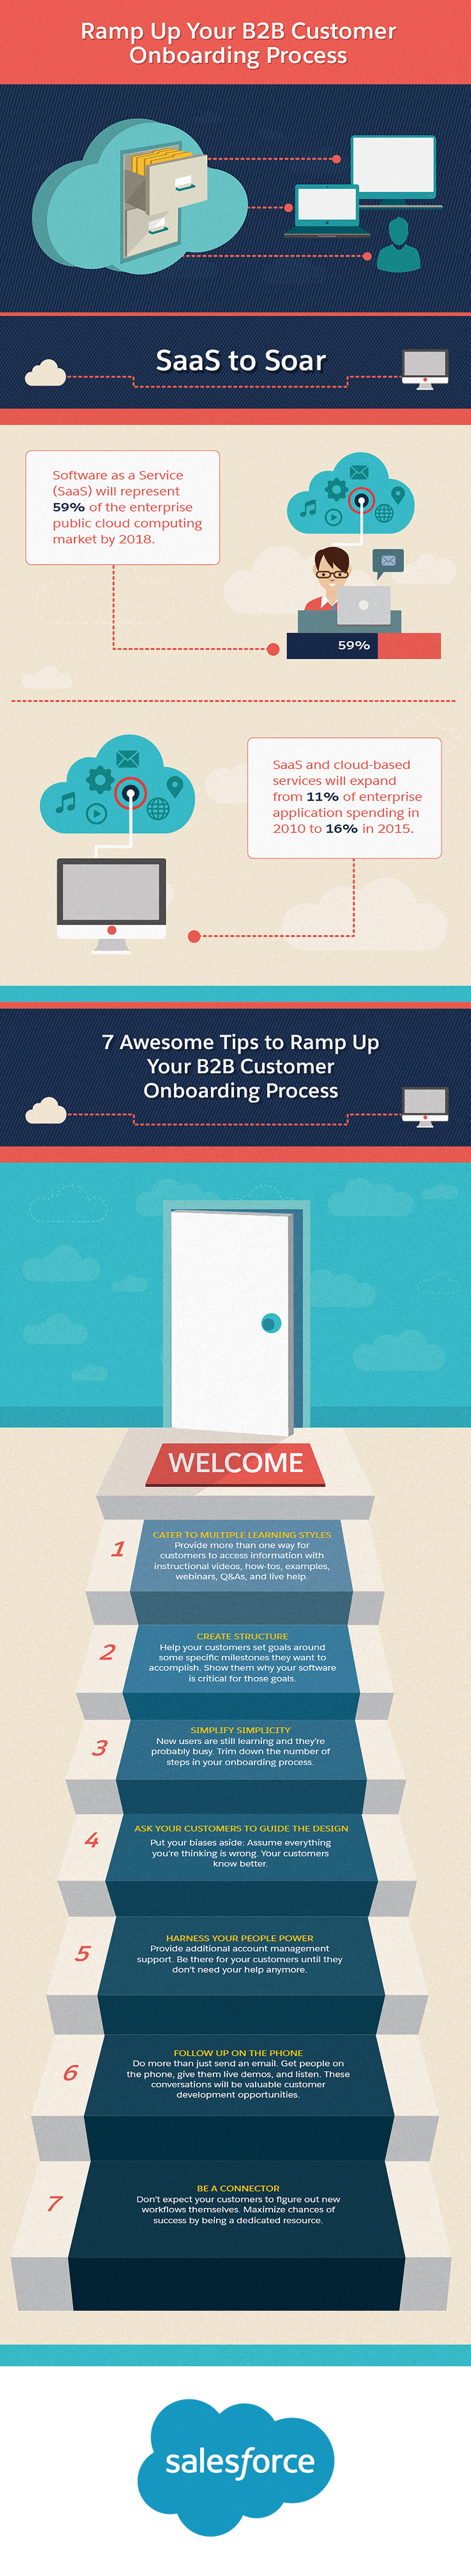 7 Awesome Tips to Ramp Up Your B2B Customer Onboarding Process